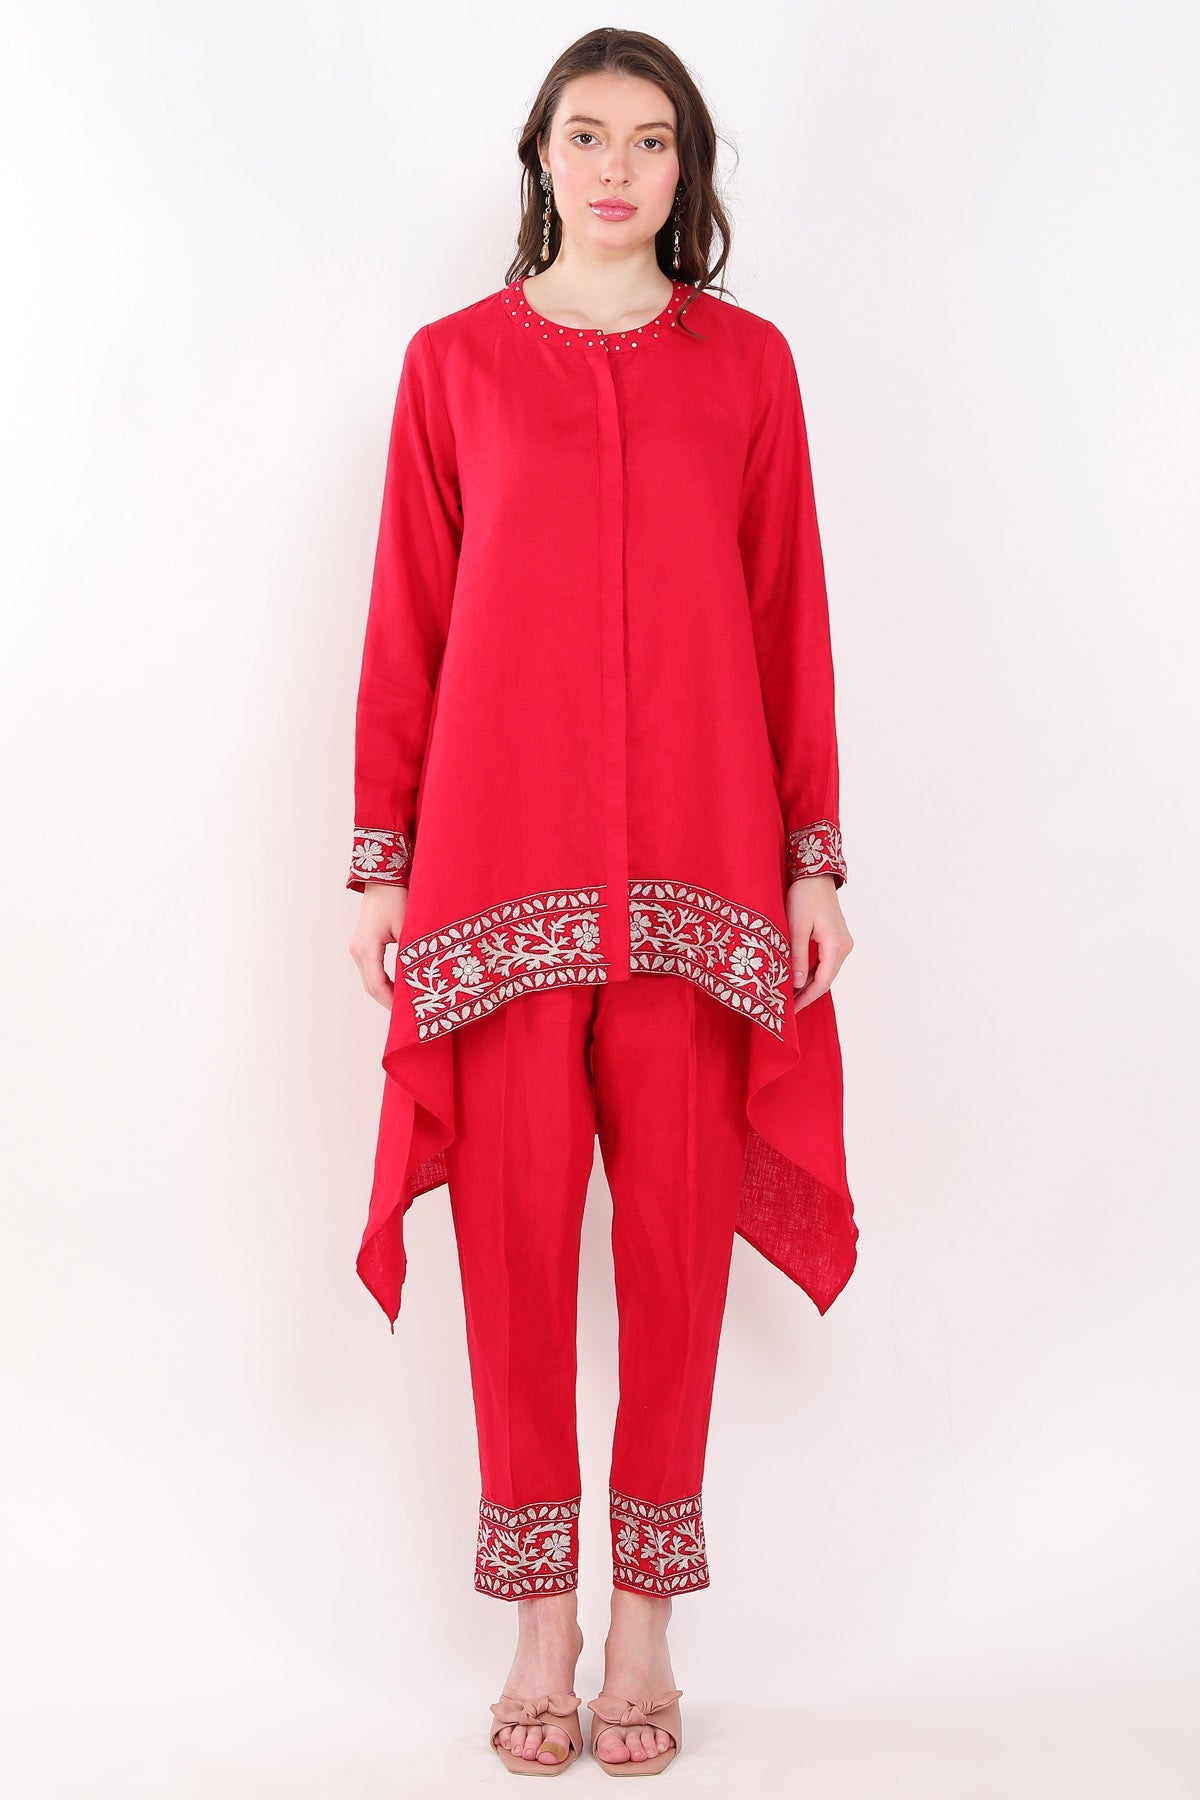 Linen Bloom Red Zari Embroidered Co-ord set for women online at ScrollnShops